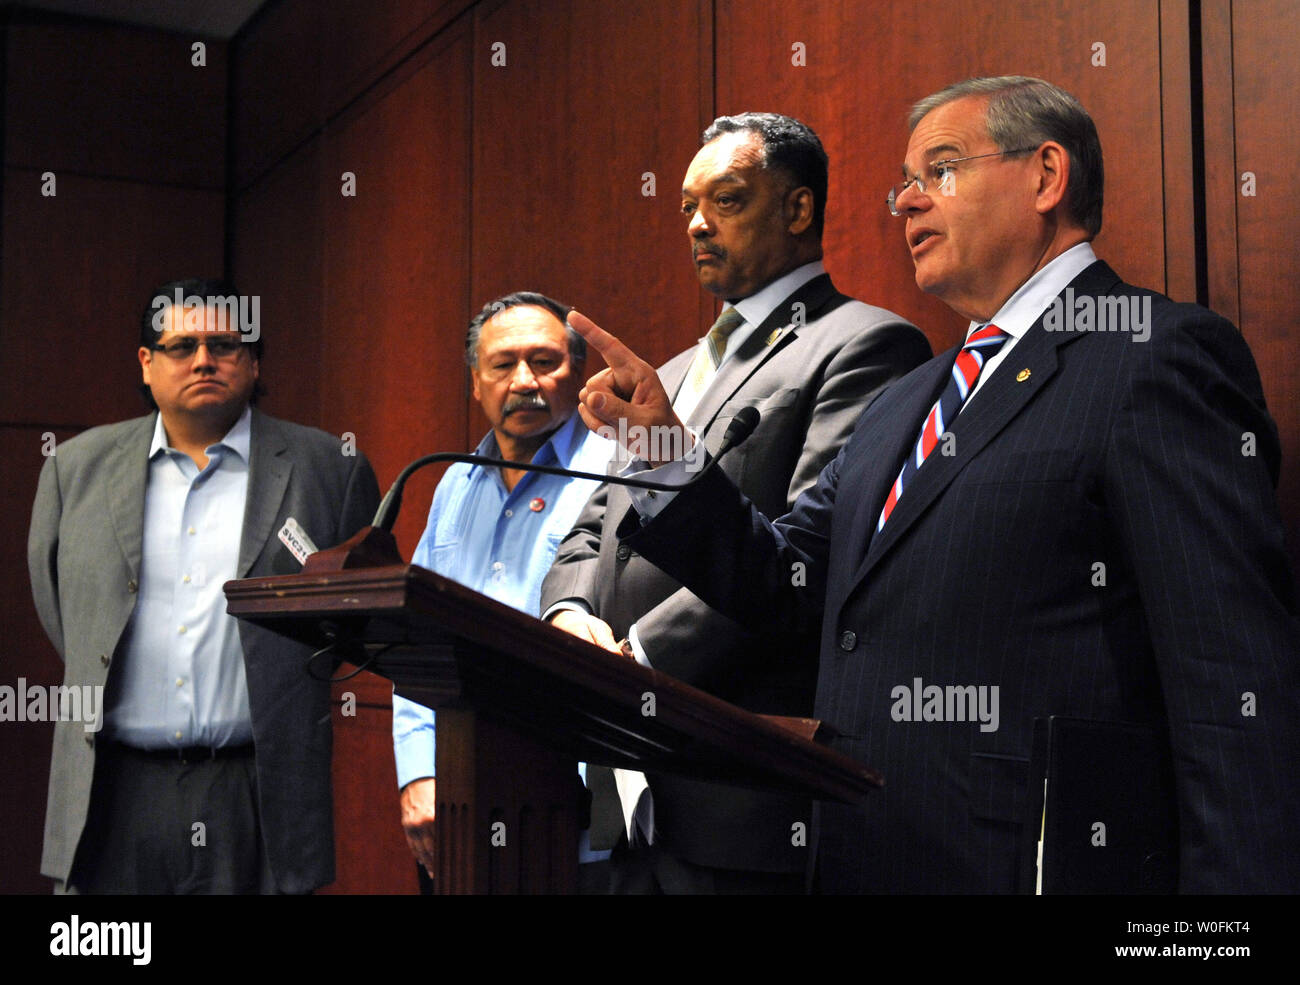 Sen. Robert Menendez (D-NJ) (R) delivers remarks at a press conference introducing the Protect Our Workers from Exploitation and Retaliation (POWER) Act in Washington on April 14, 2010. Menendez was joined by, right to left, Rev. Jesse Jackson, Arturo Rodriguez, President of United Farm Workers of America, and Daniel Castellanos, Organizer of Alliance of Guestworkers for Dignity.  UPI/Kevin Dietsch Stock Photo